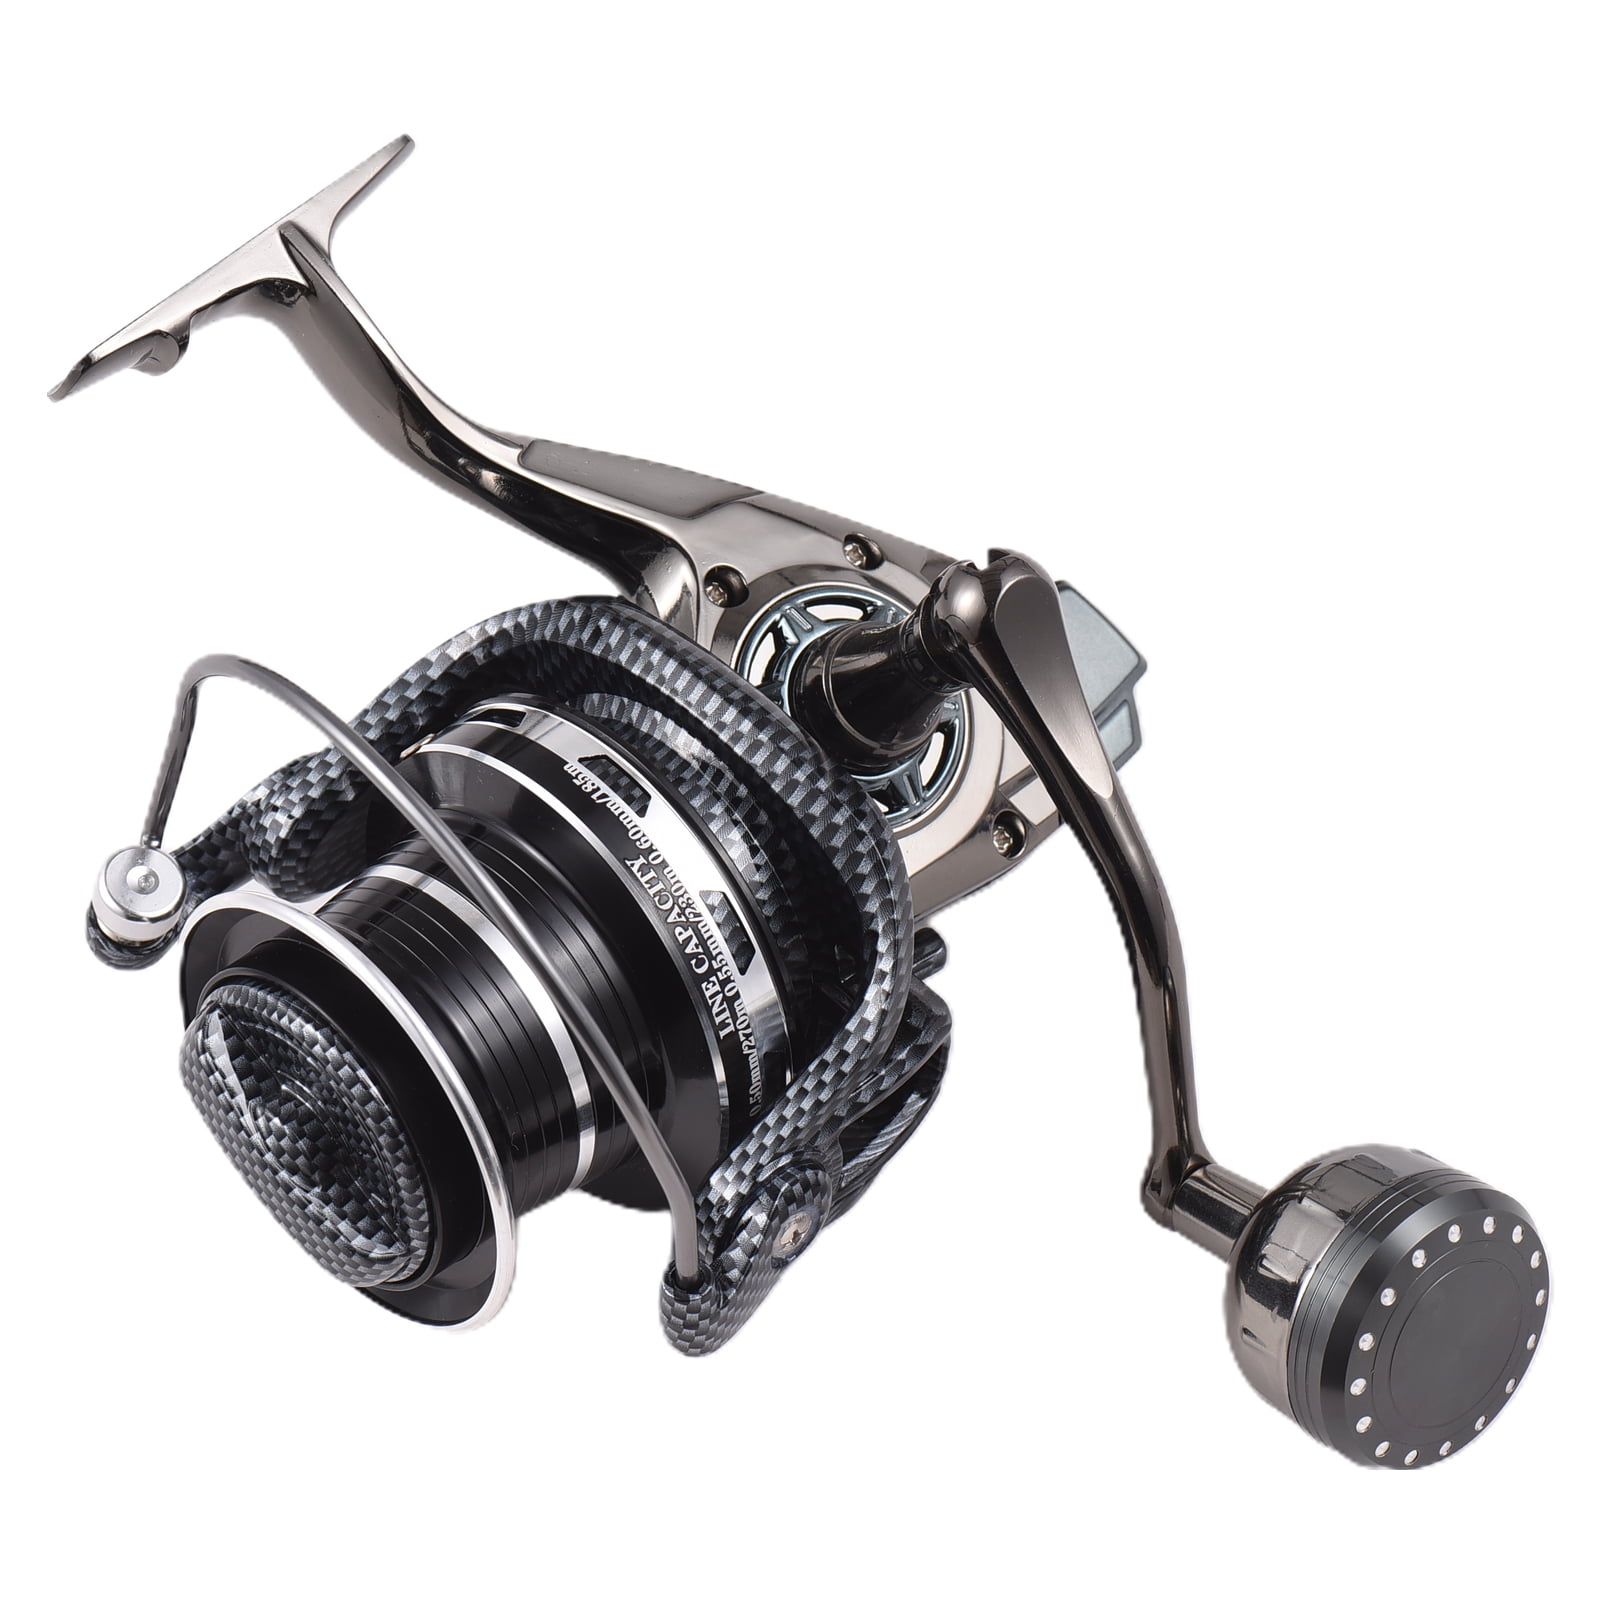 FDDL Snake Pattern DE Color Fishing Reels Spinning Metal Long Casting Reel,  14+1 Gear Ratio, Ultra Smooth Performance for Saltwater/Freshwater Fishing  